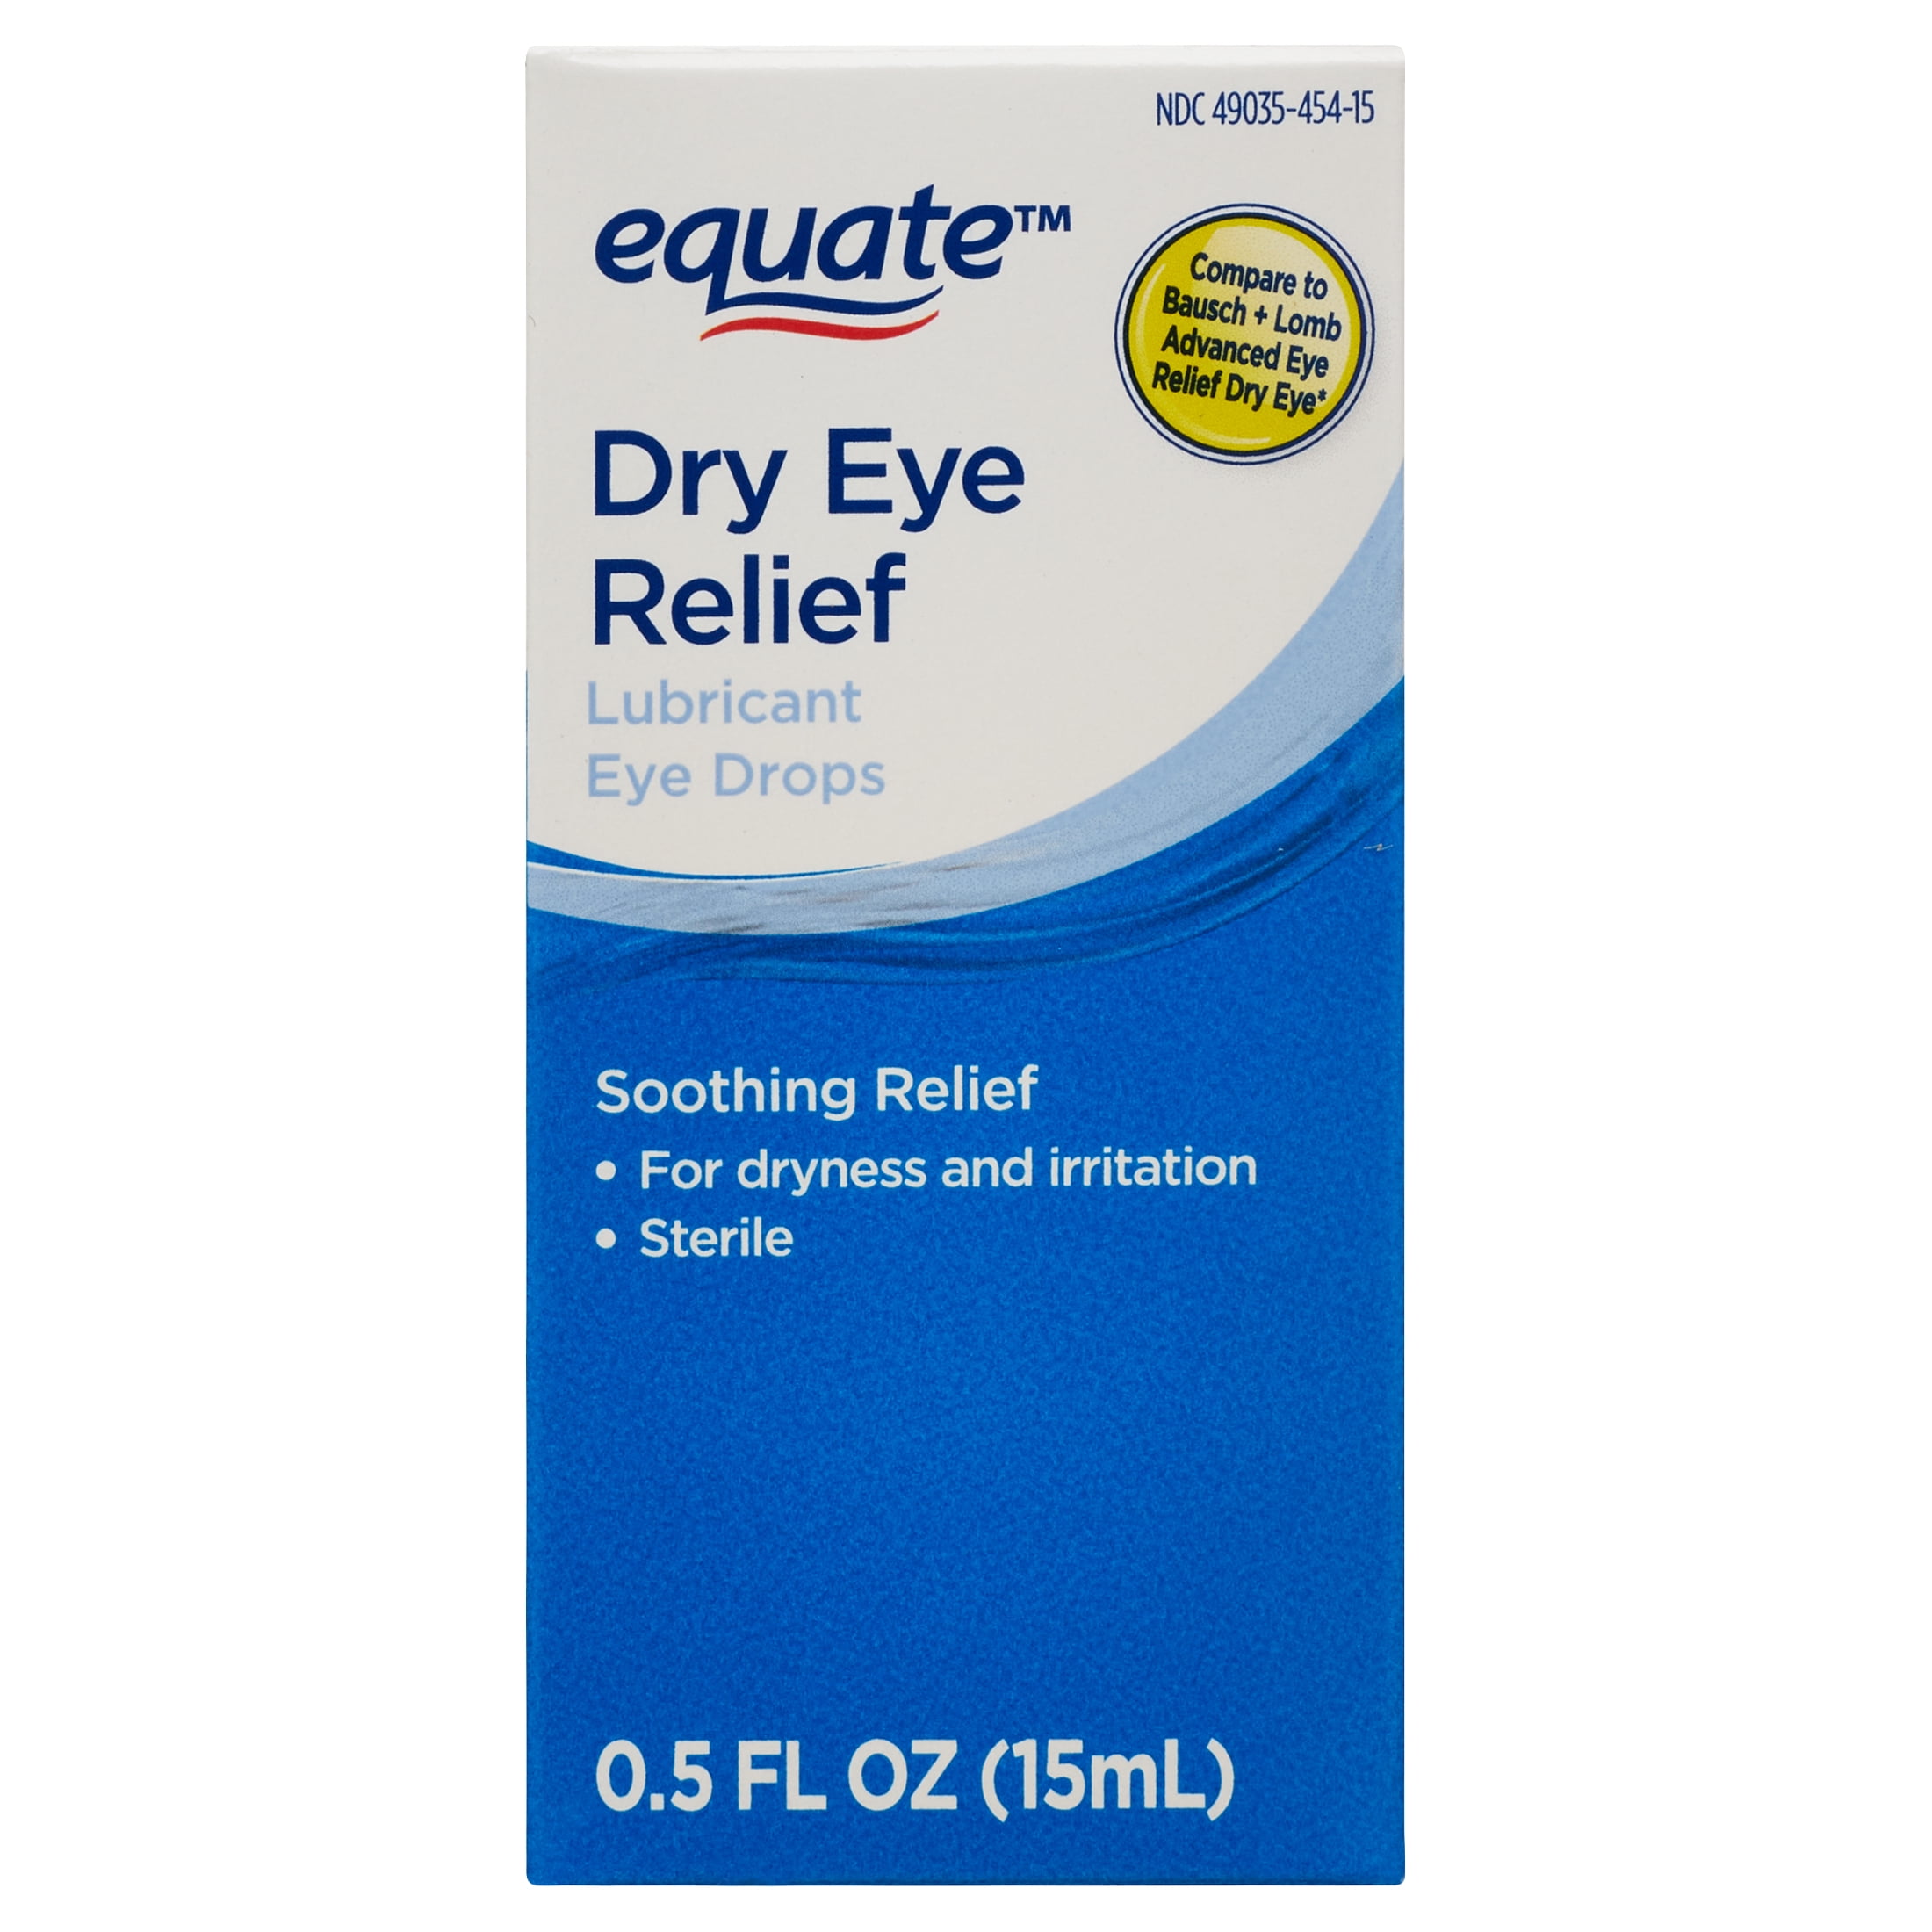 Buy Equate Dry Eye Relief Lubricant Eye Drops, 0.5 fl oz Online at